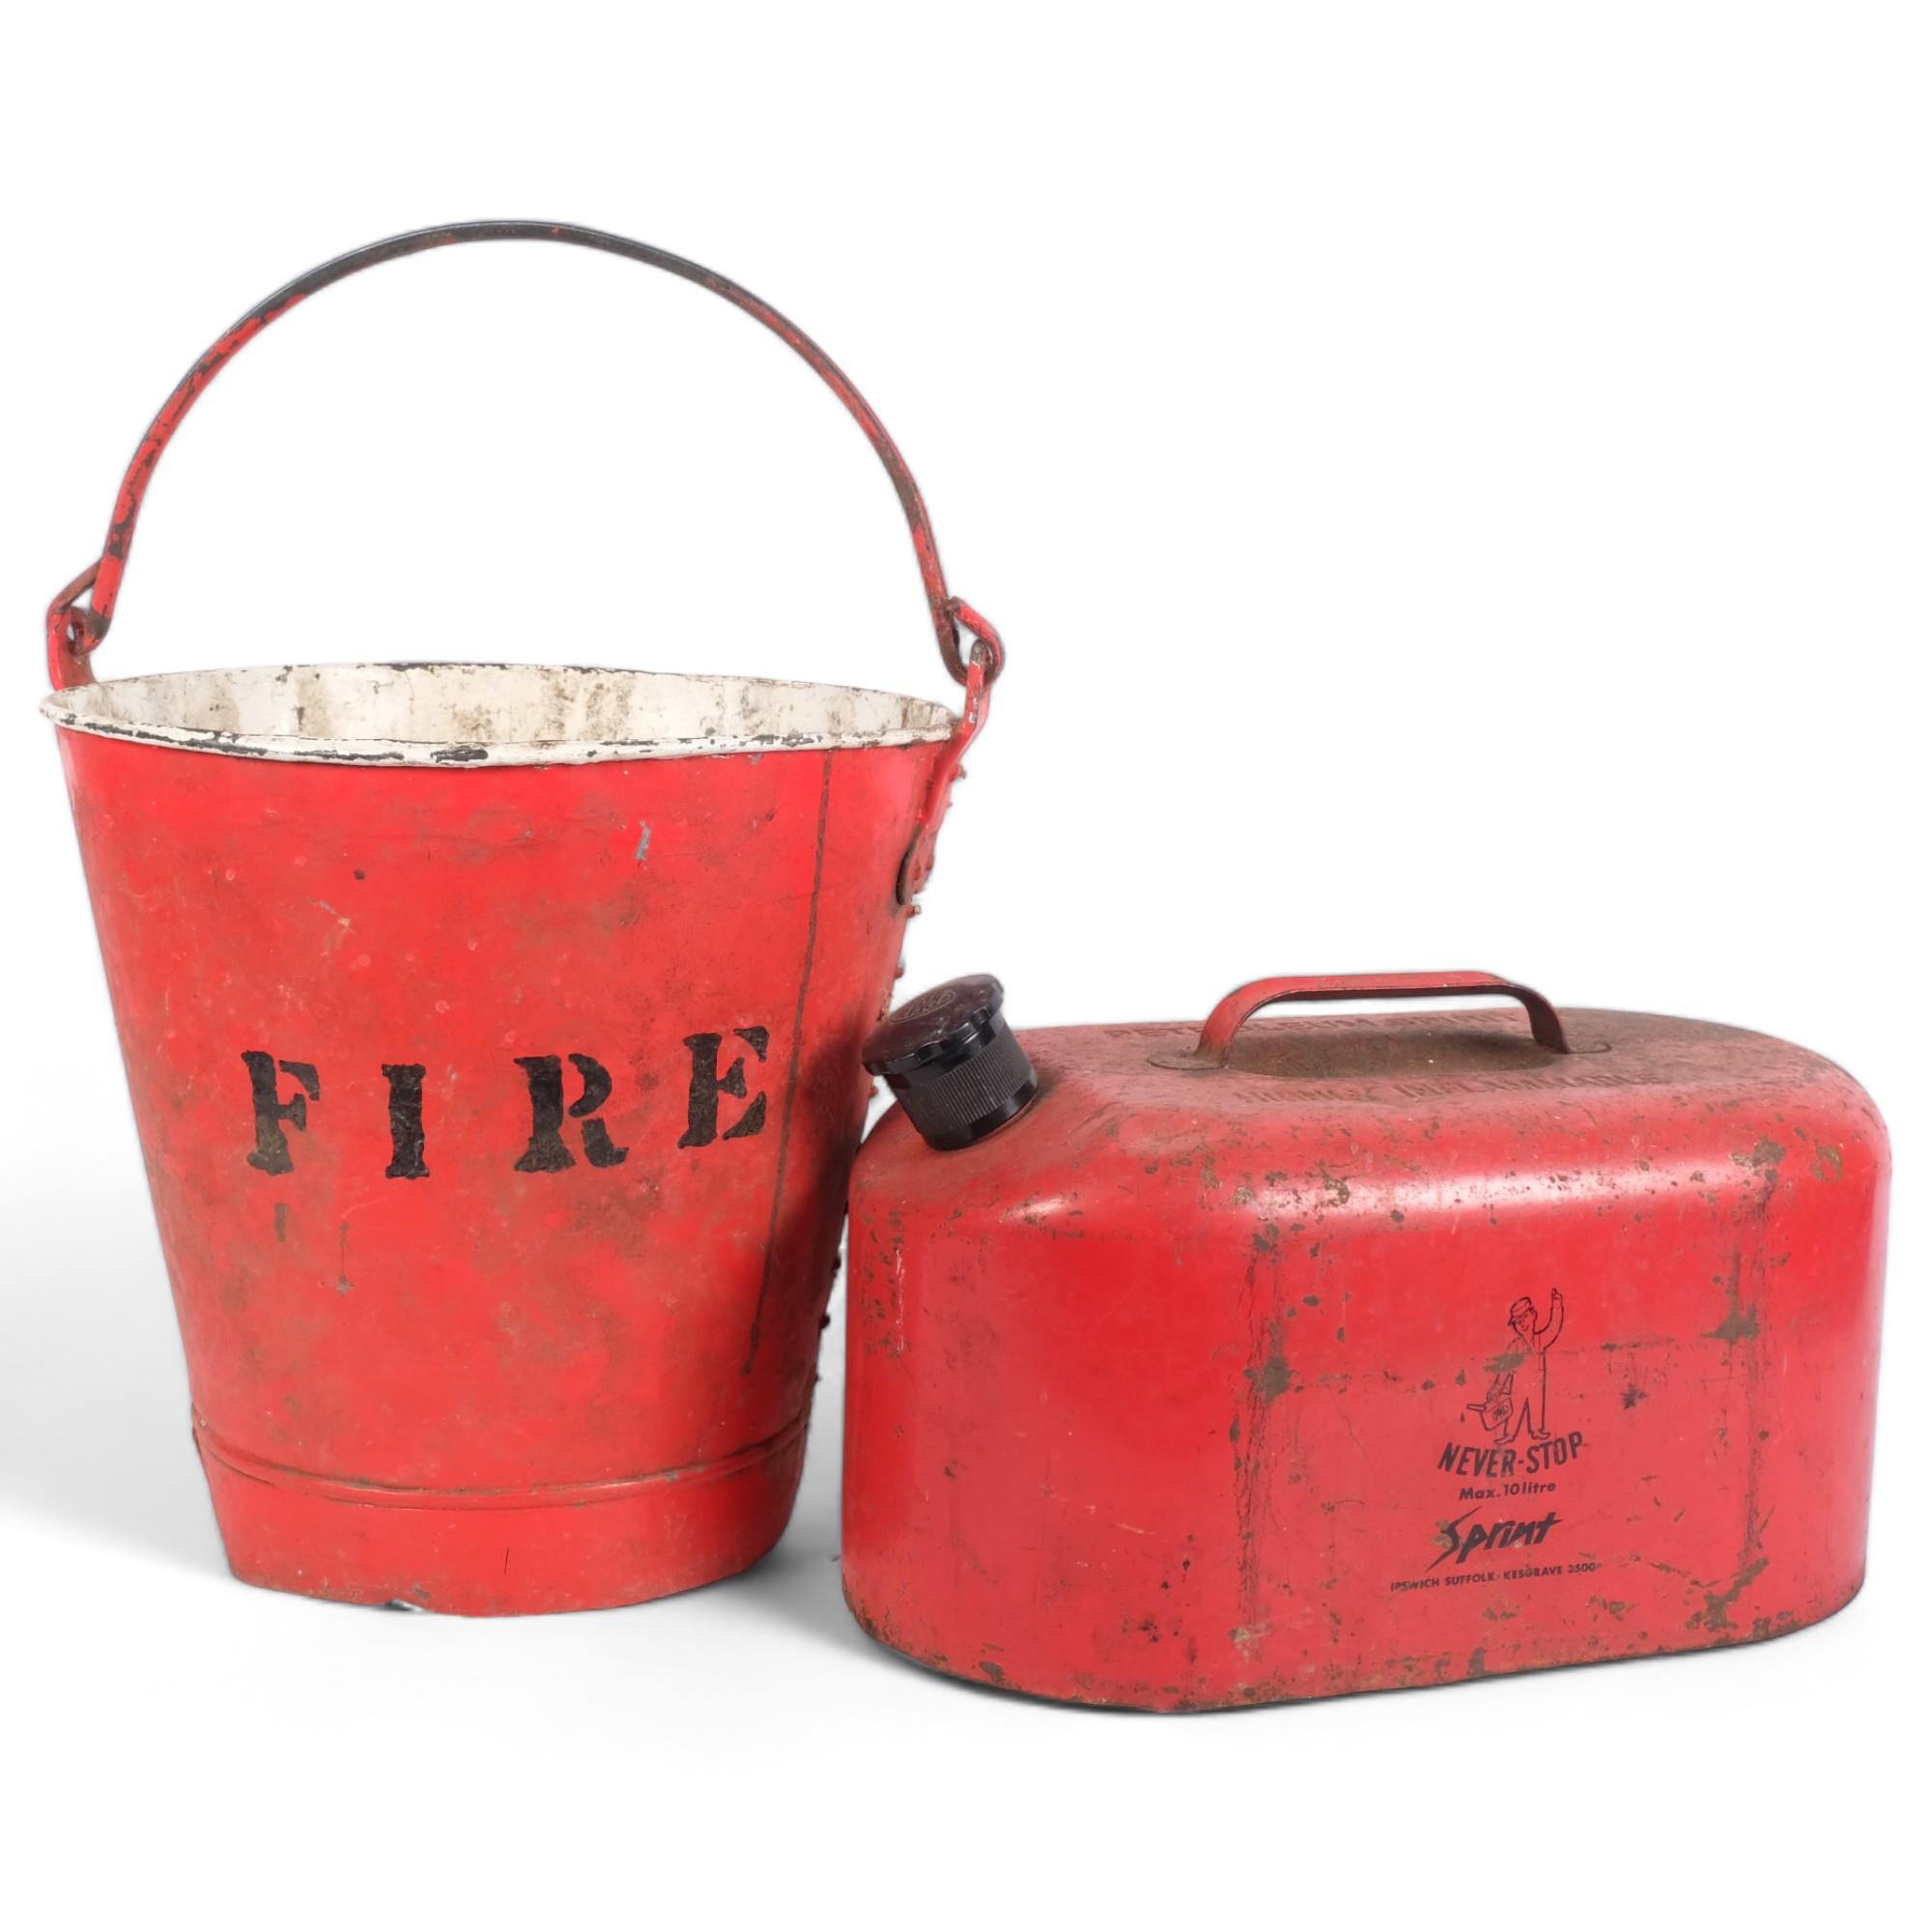 An old fire bucket, and a Never-Stop 10 litre petrol can